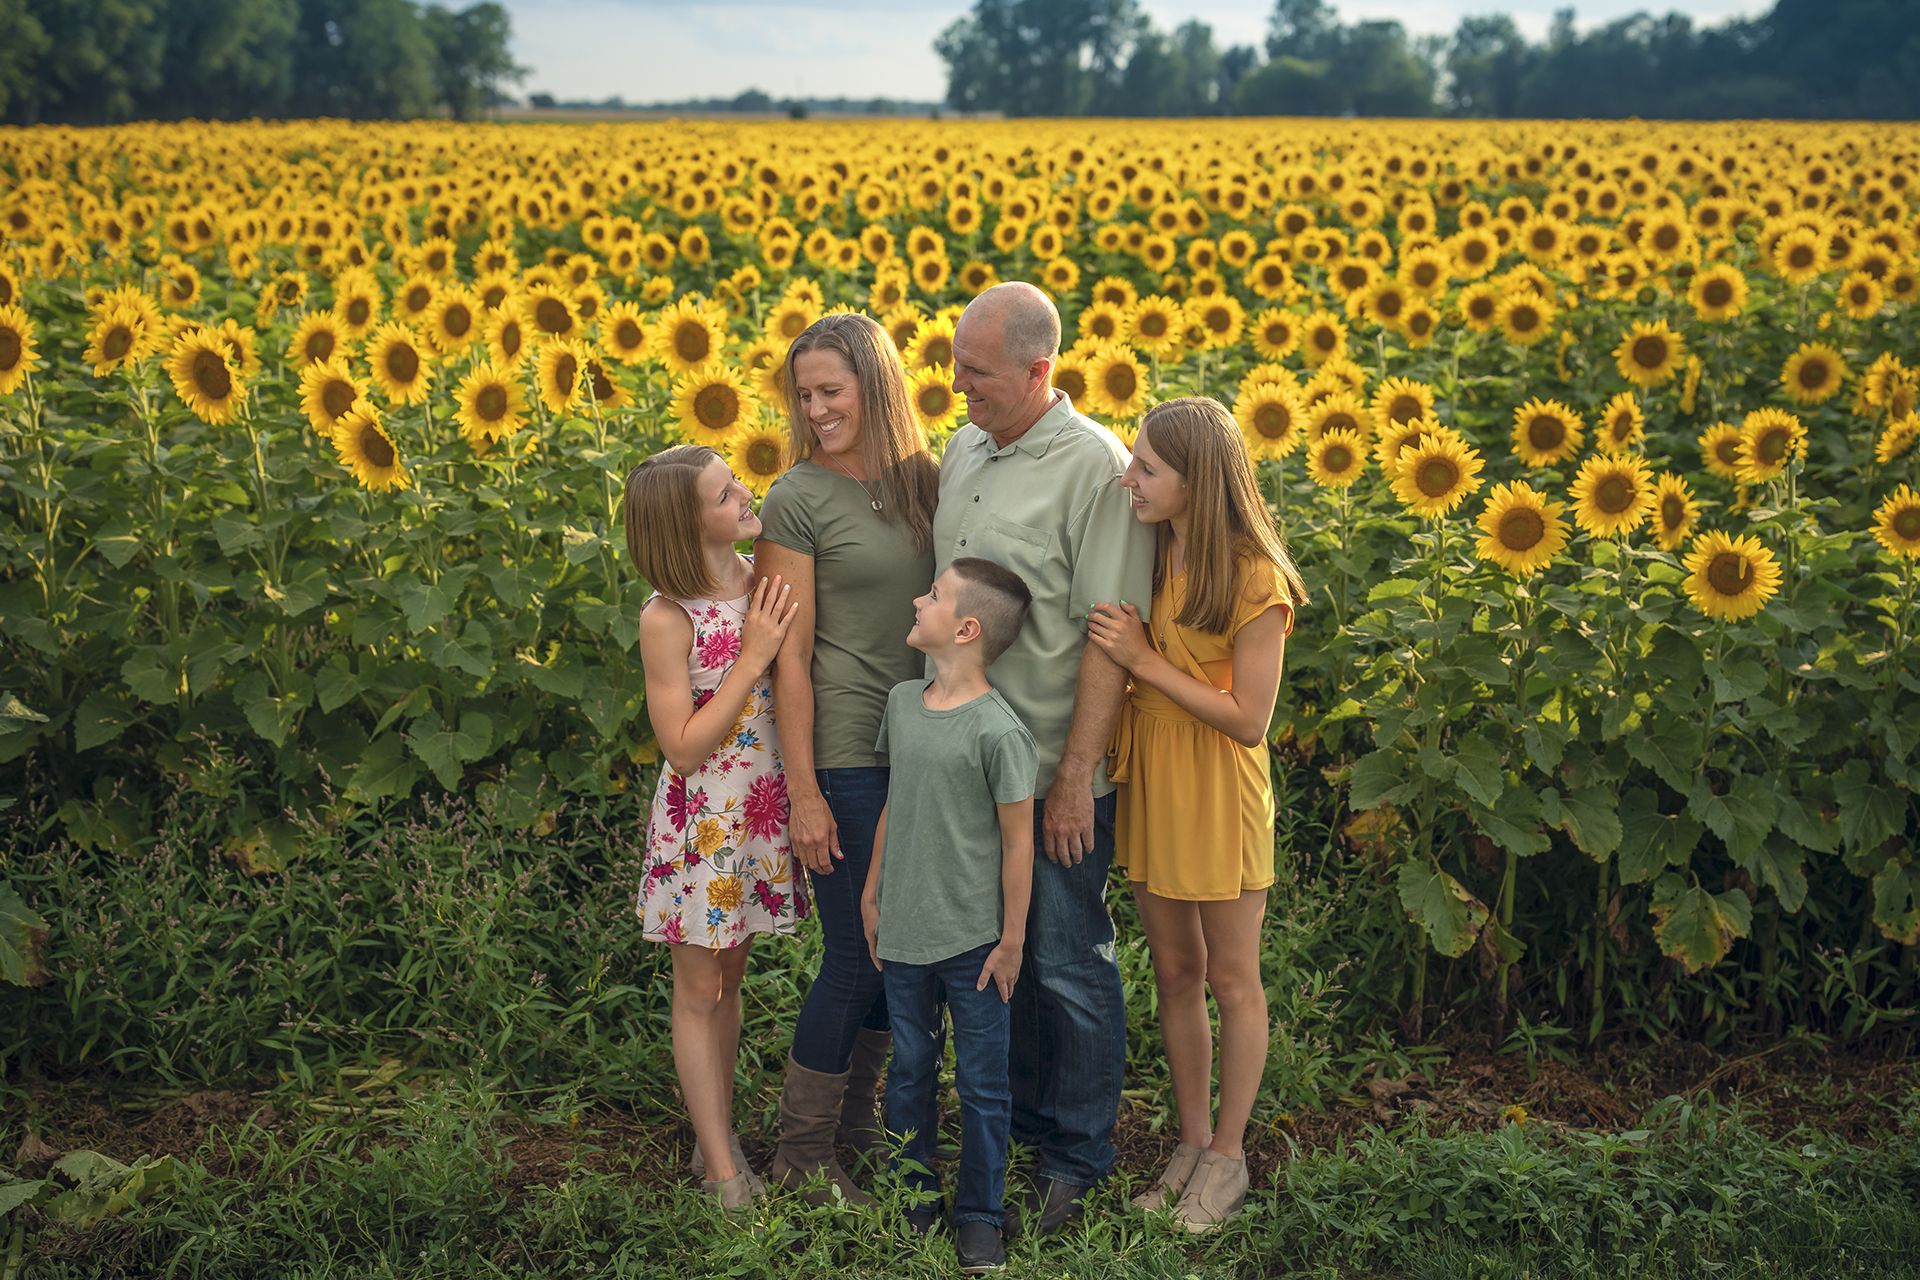 A golden yellow family photo of a standing close to each other in a sunflower field near Detroit, Michigan.